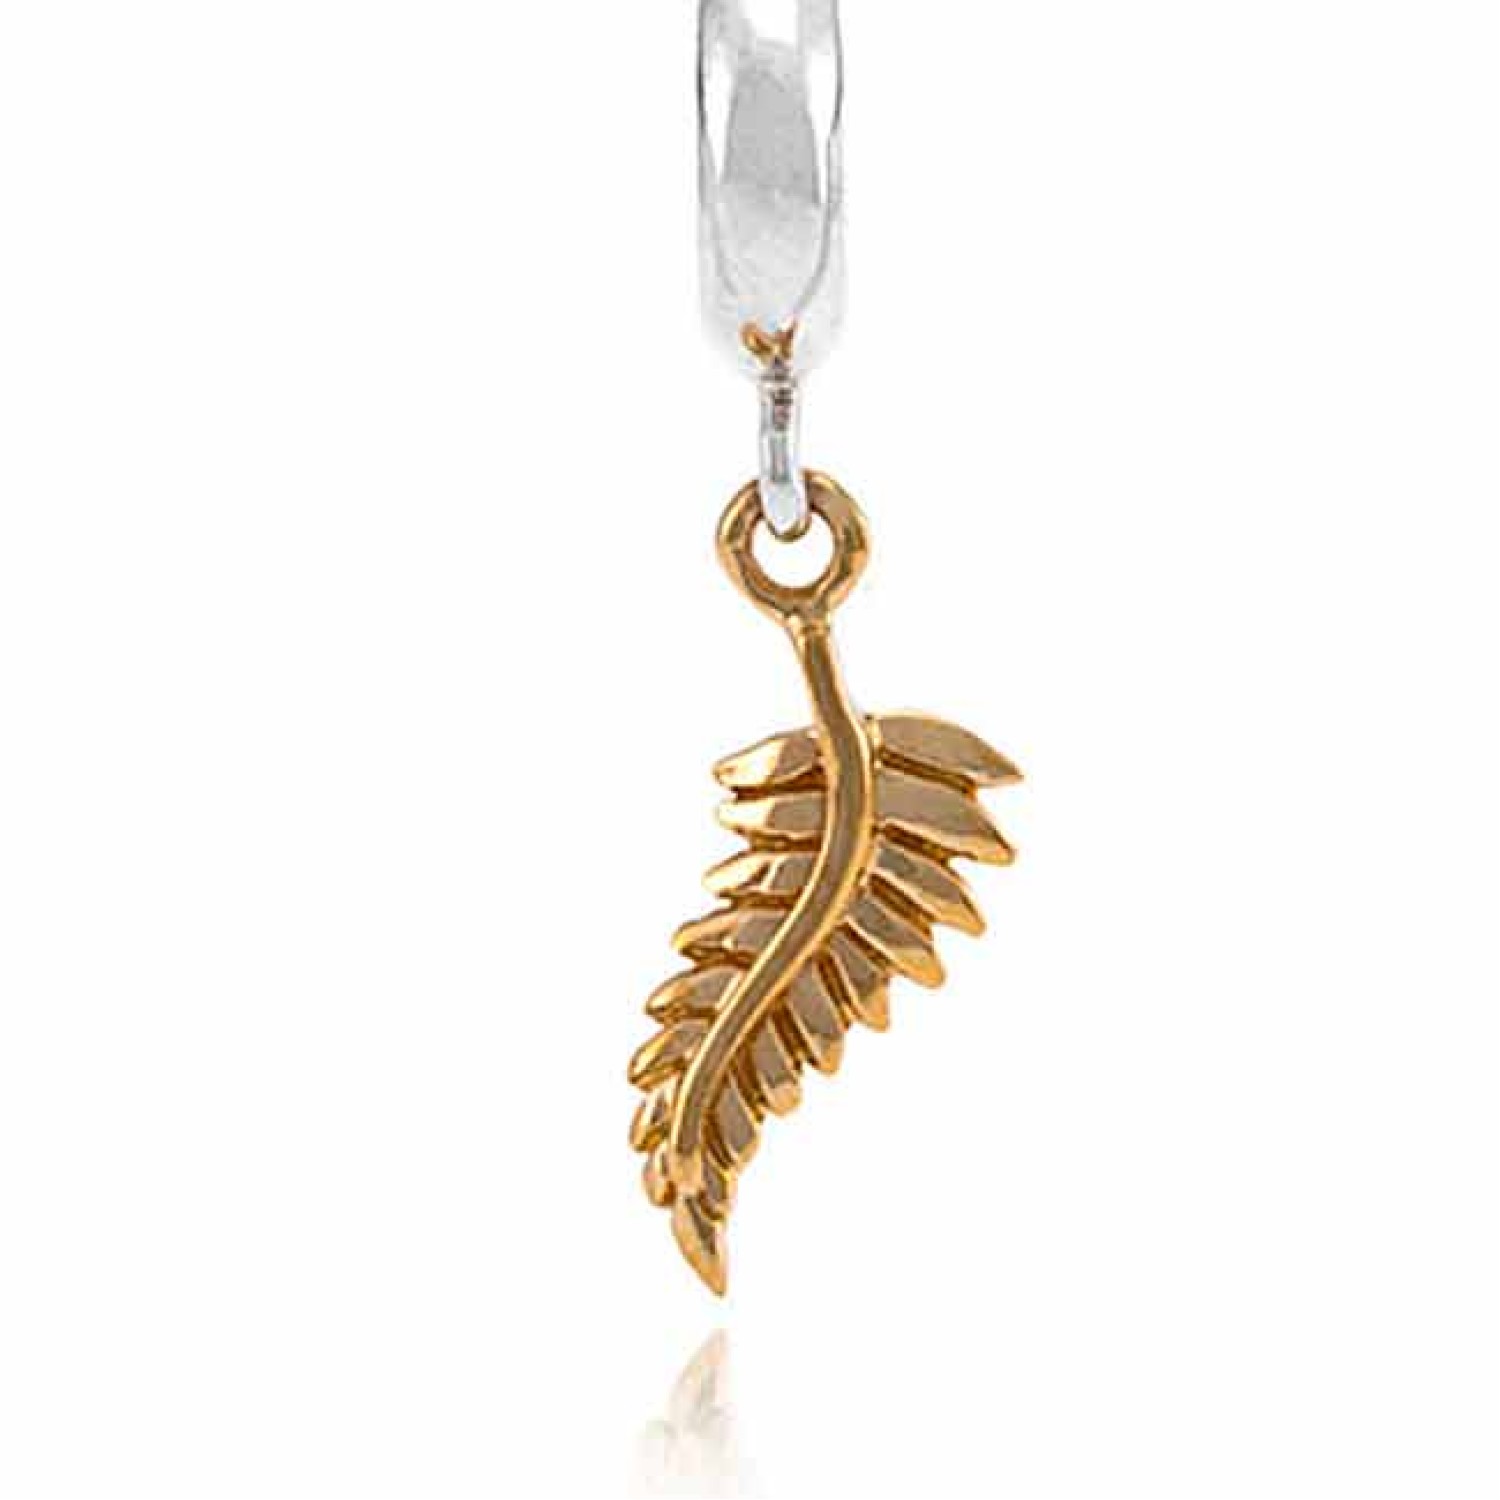 128G Evolve 9ct Gold Charm Aotearoa Fern. The unofficial symbol of New Zealand, the silver fern evokes a sense of pride, admiration and dedication towards beautiful Aotearoa.  The sculptural beauty of our native fern’s foliage, with its striking silve @ch